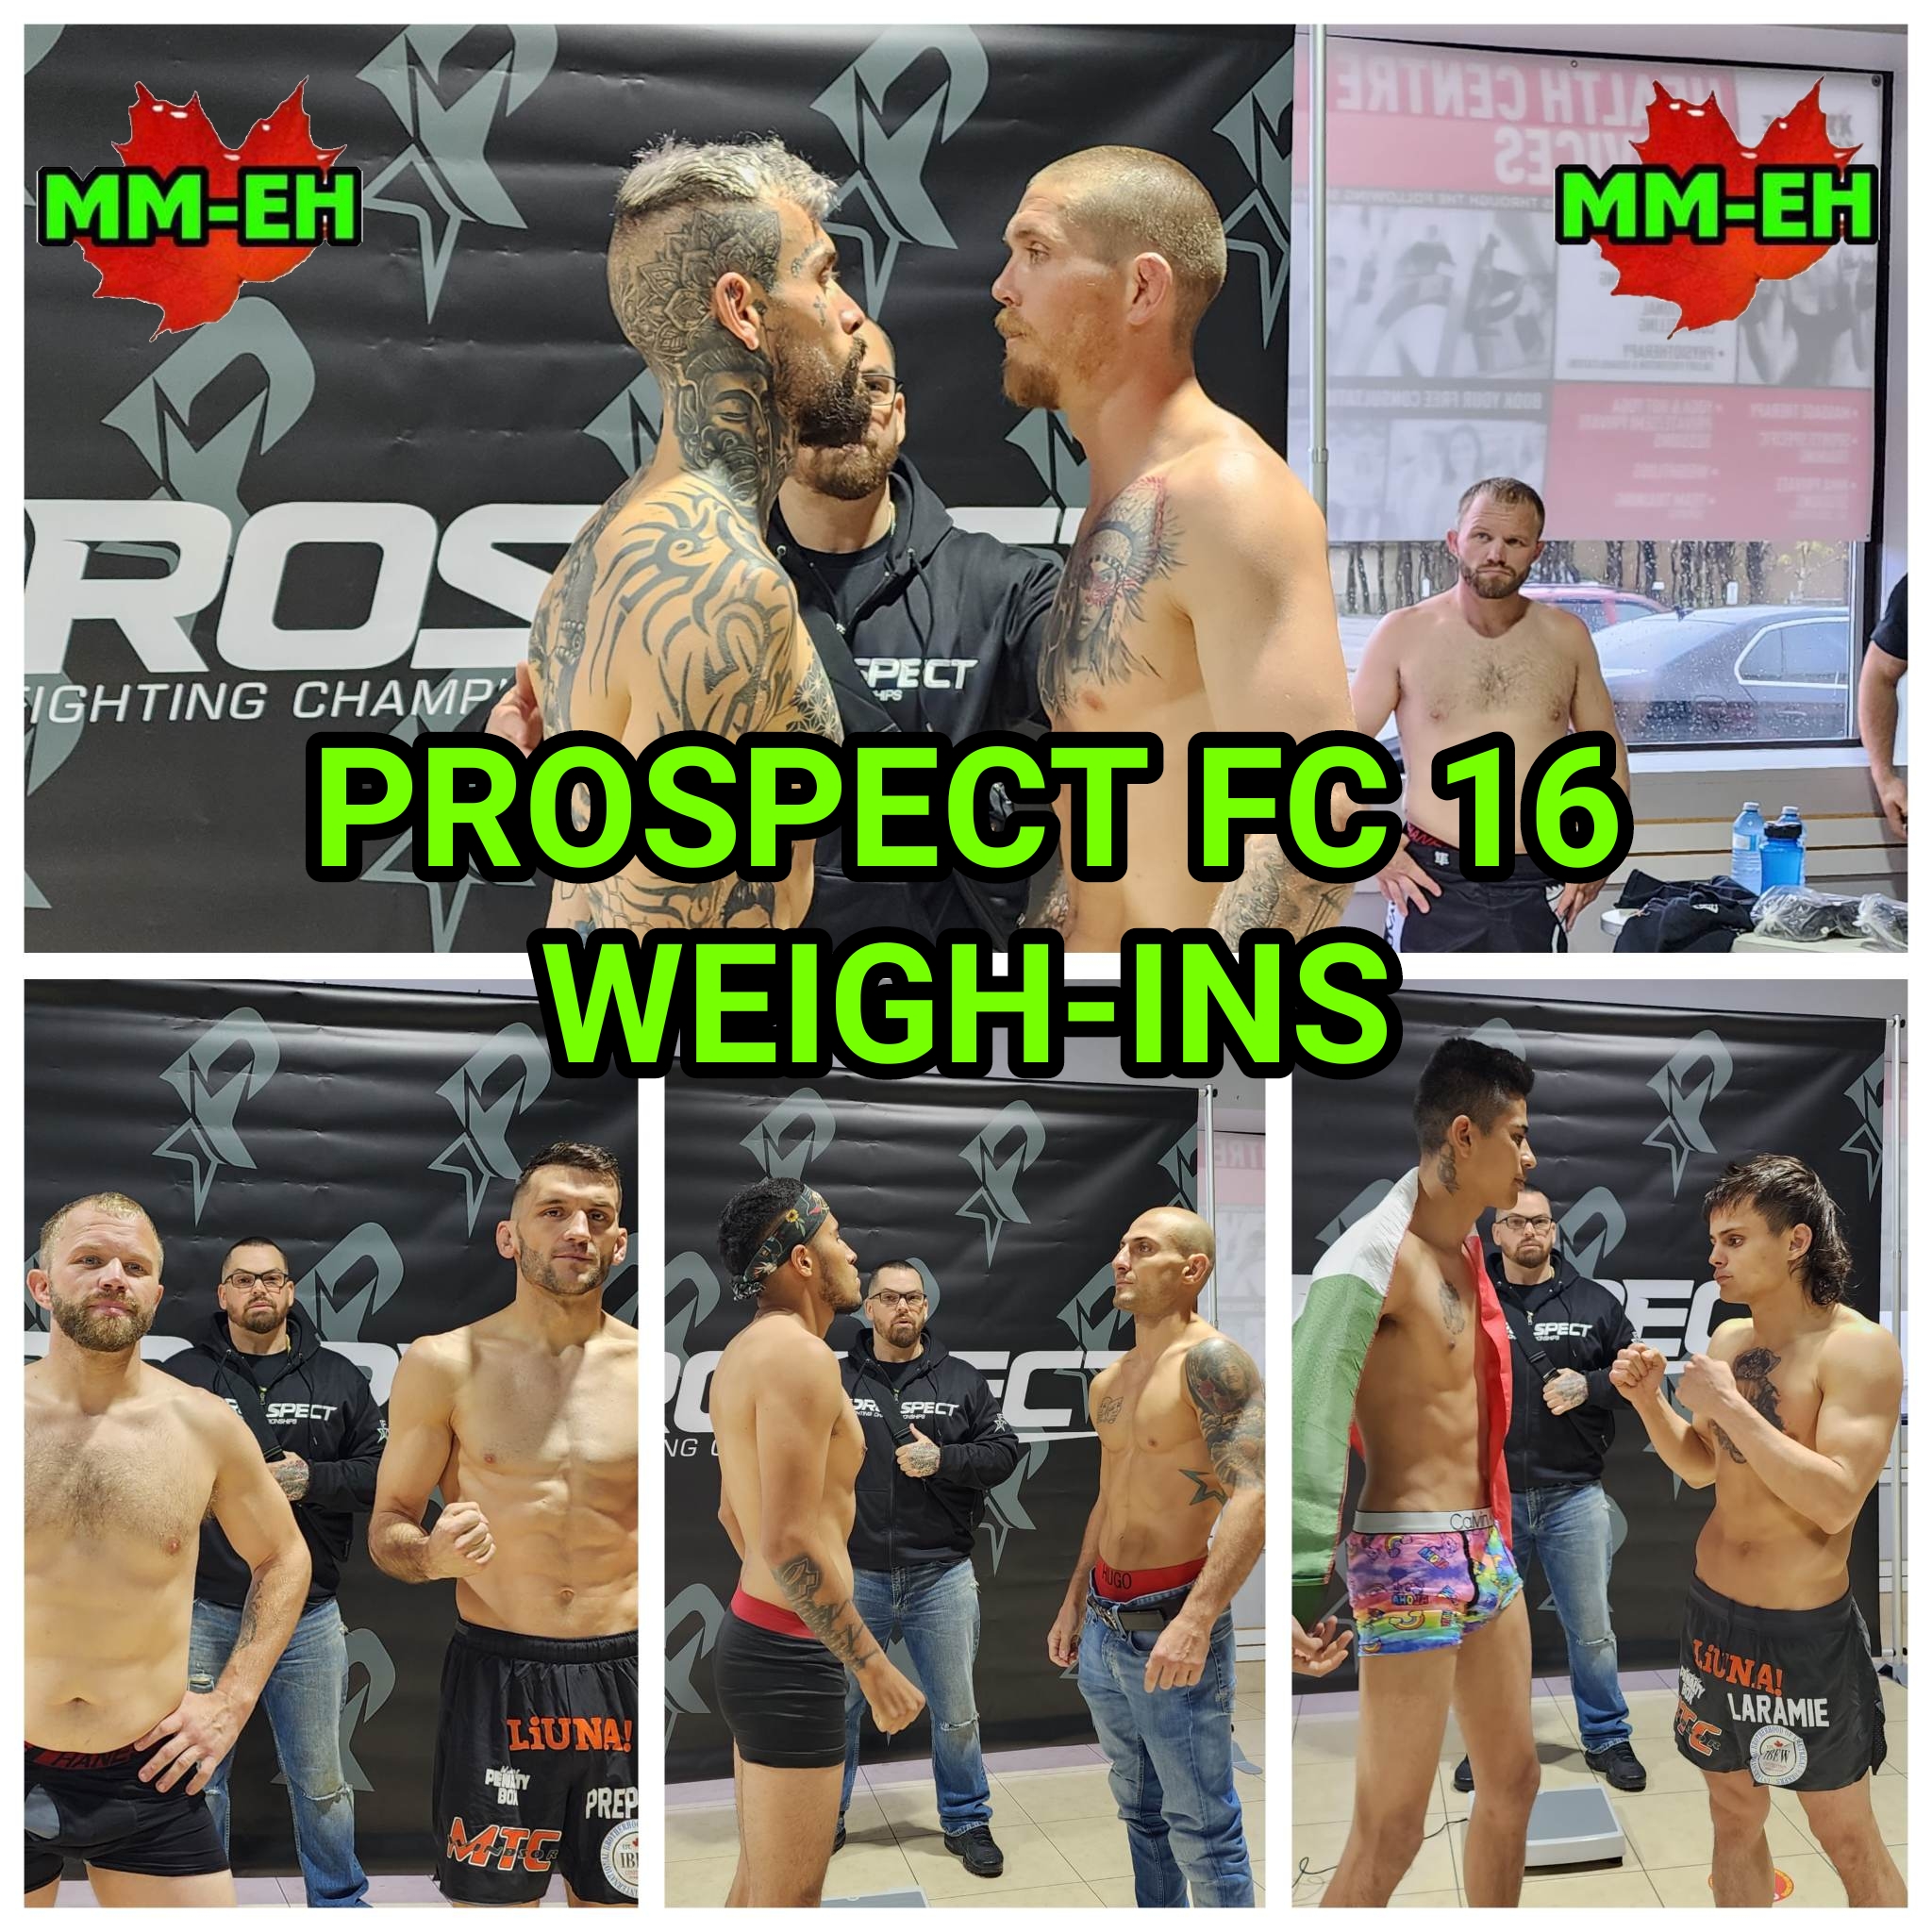 Prospect FC 16 Weigh-In Results